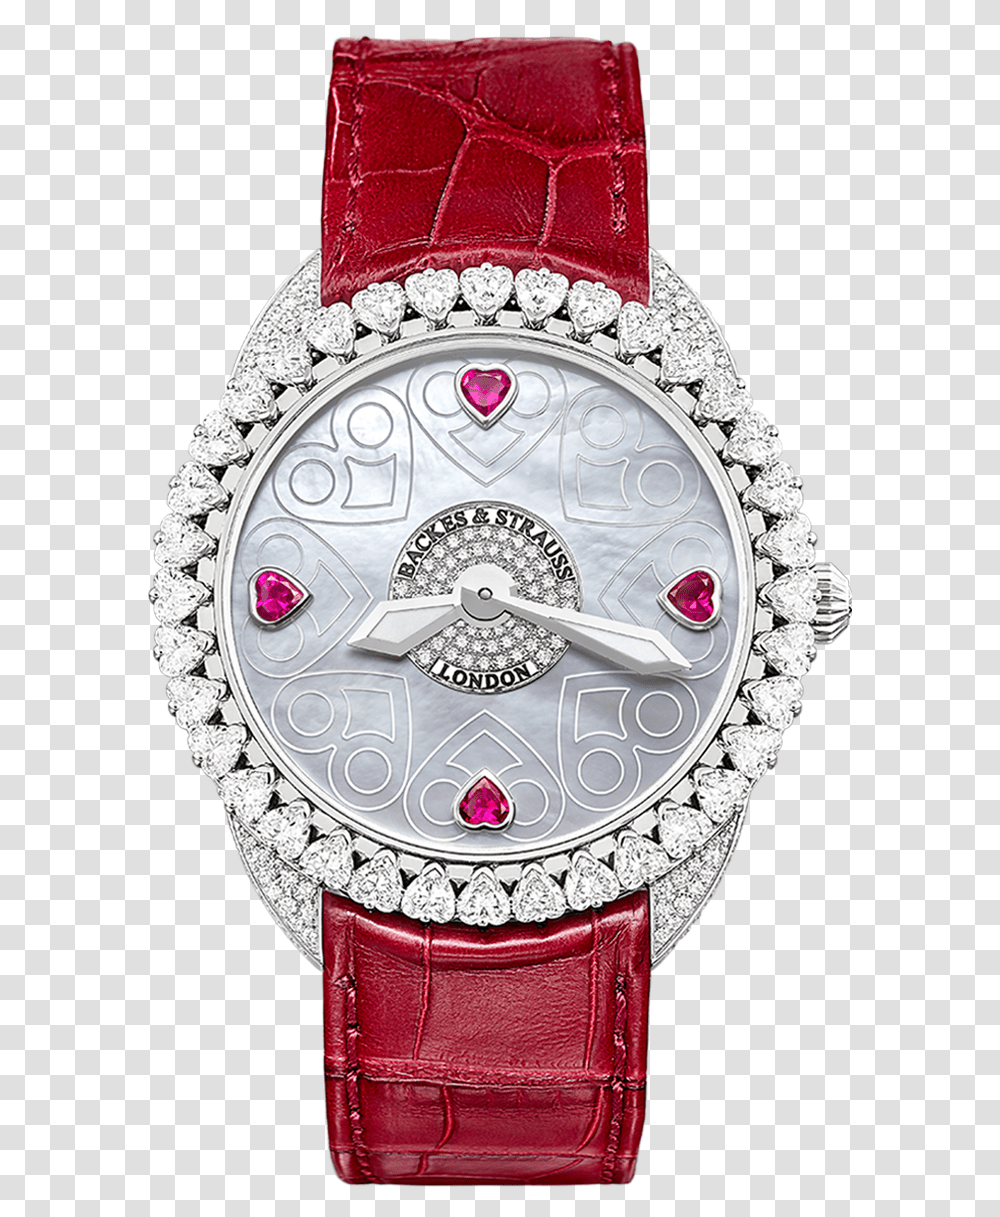 Piccadilly Renaissance Diamond Heart Watch, Wristwatch, Brooch, Jewelry, Accessories Transparent Png